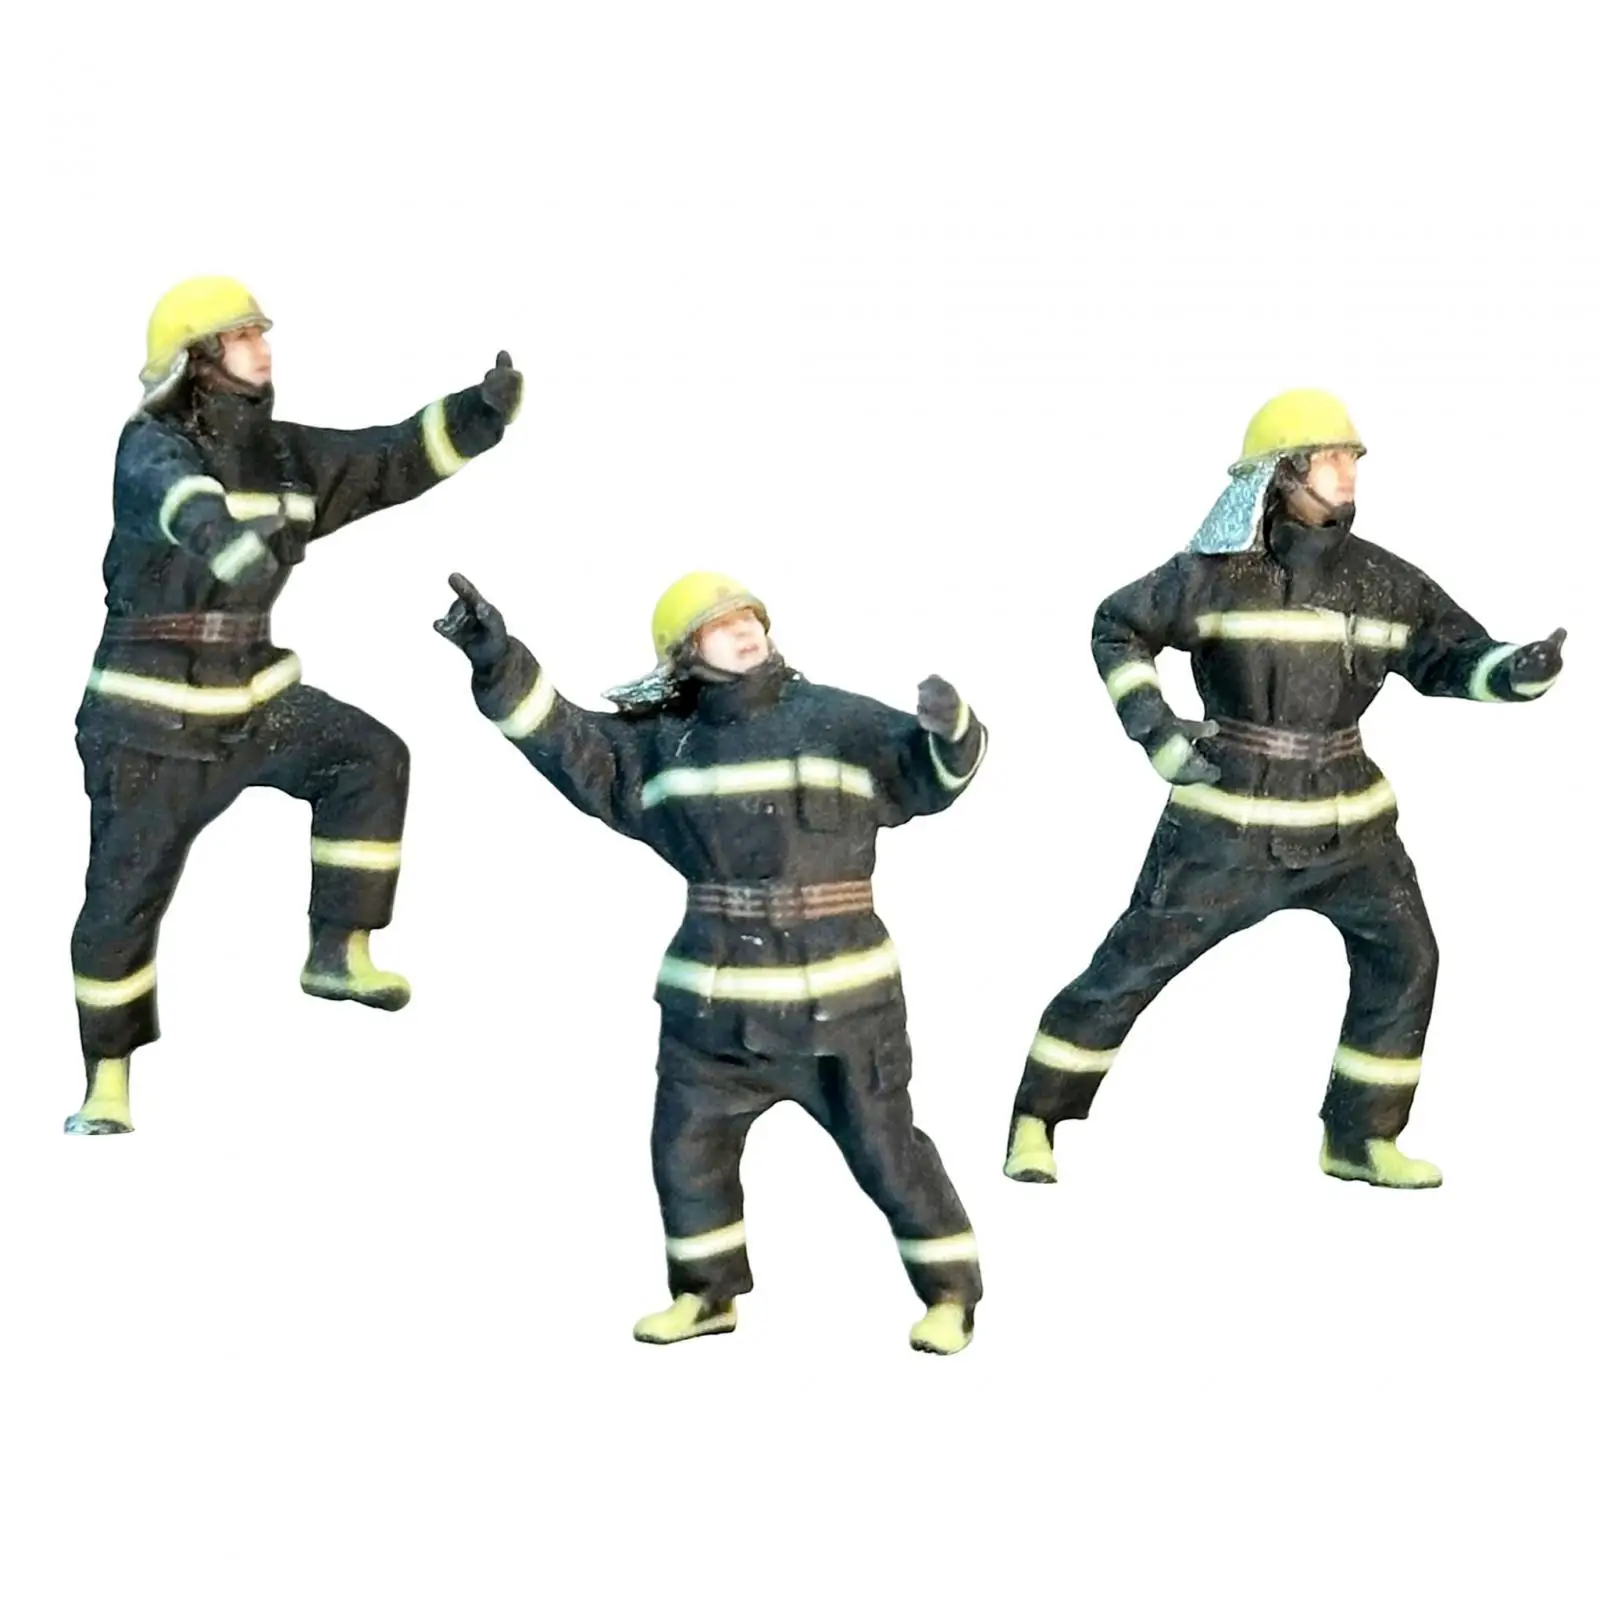 

3 Pieces Miniature Firefighter Figures Model Trains People Figures for Photography Props Dollhouse DIY Scene Diorama Layout